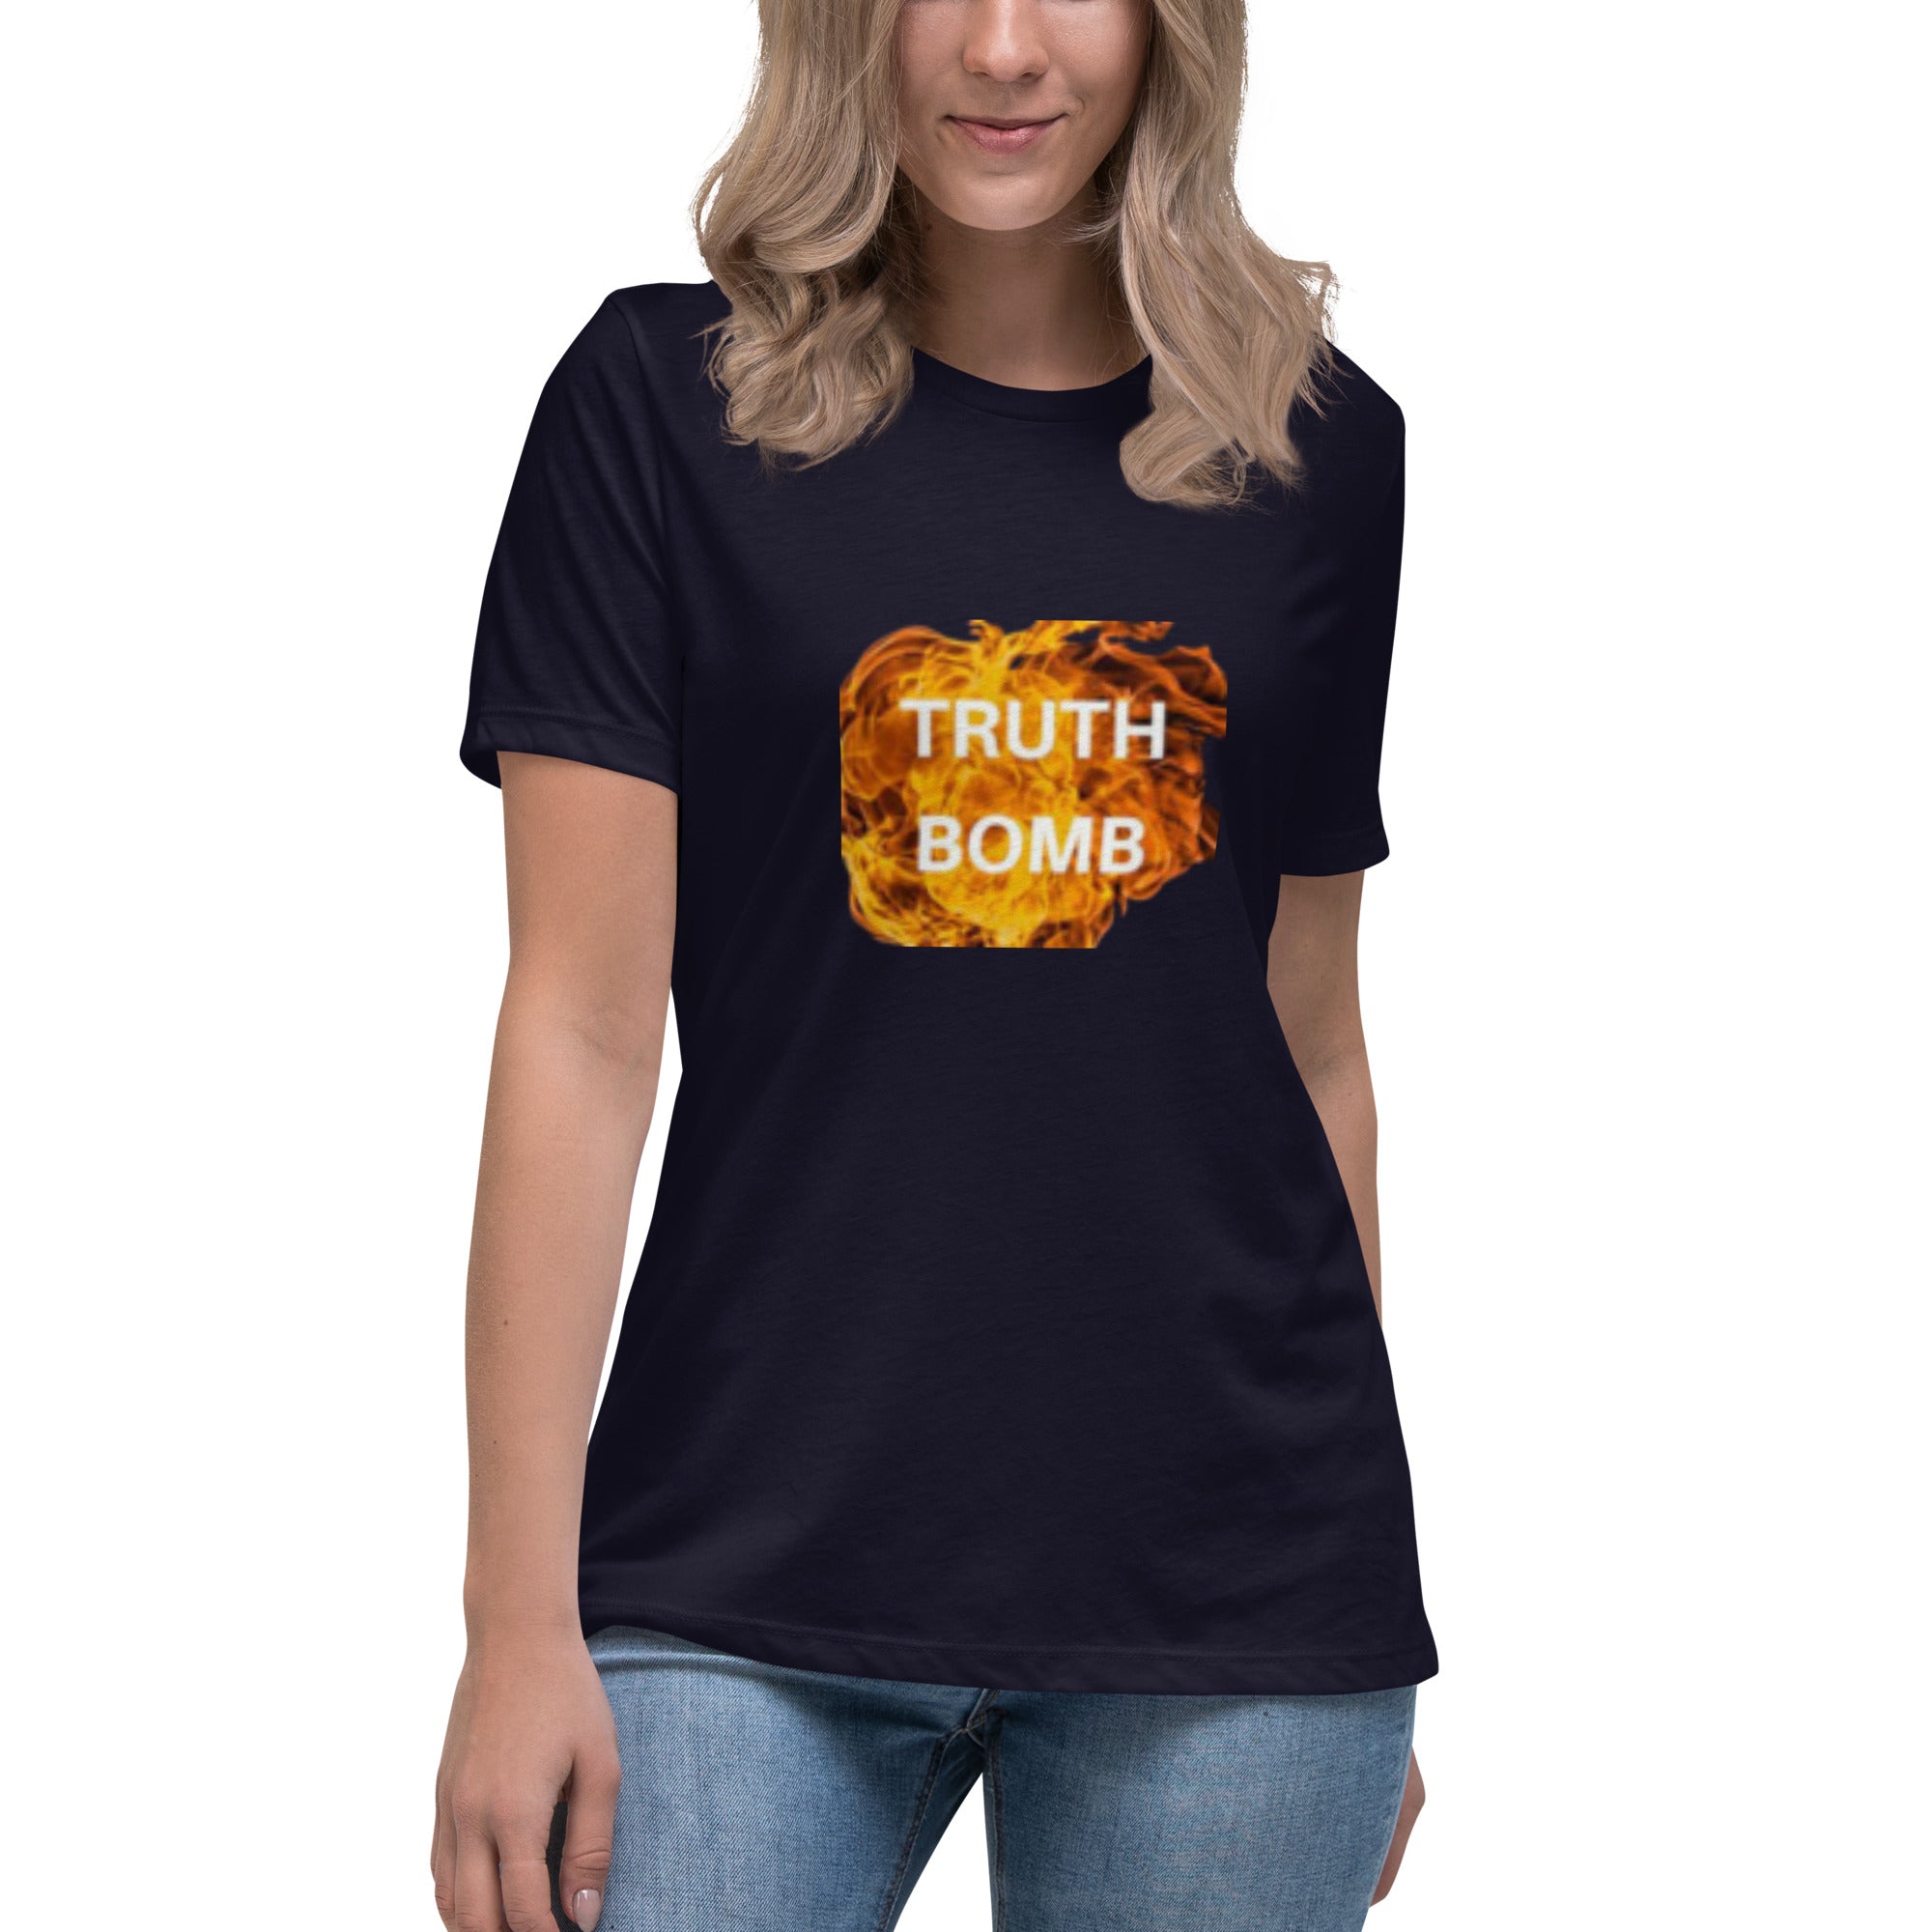 Buy Truth Bomb Women's Relaxed T-Shirt - Comfort and Style